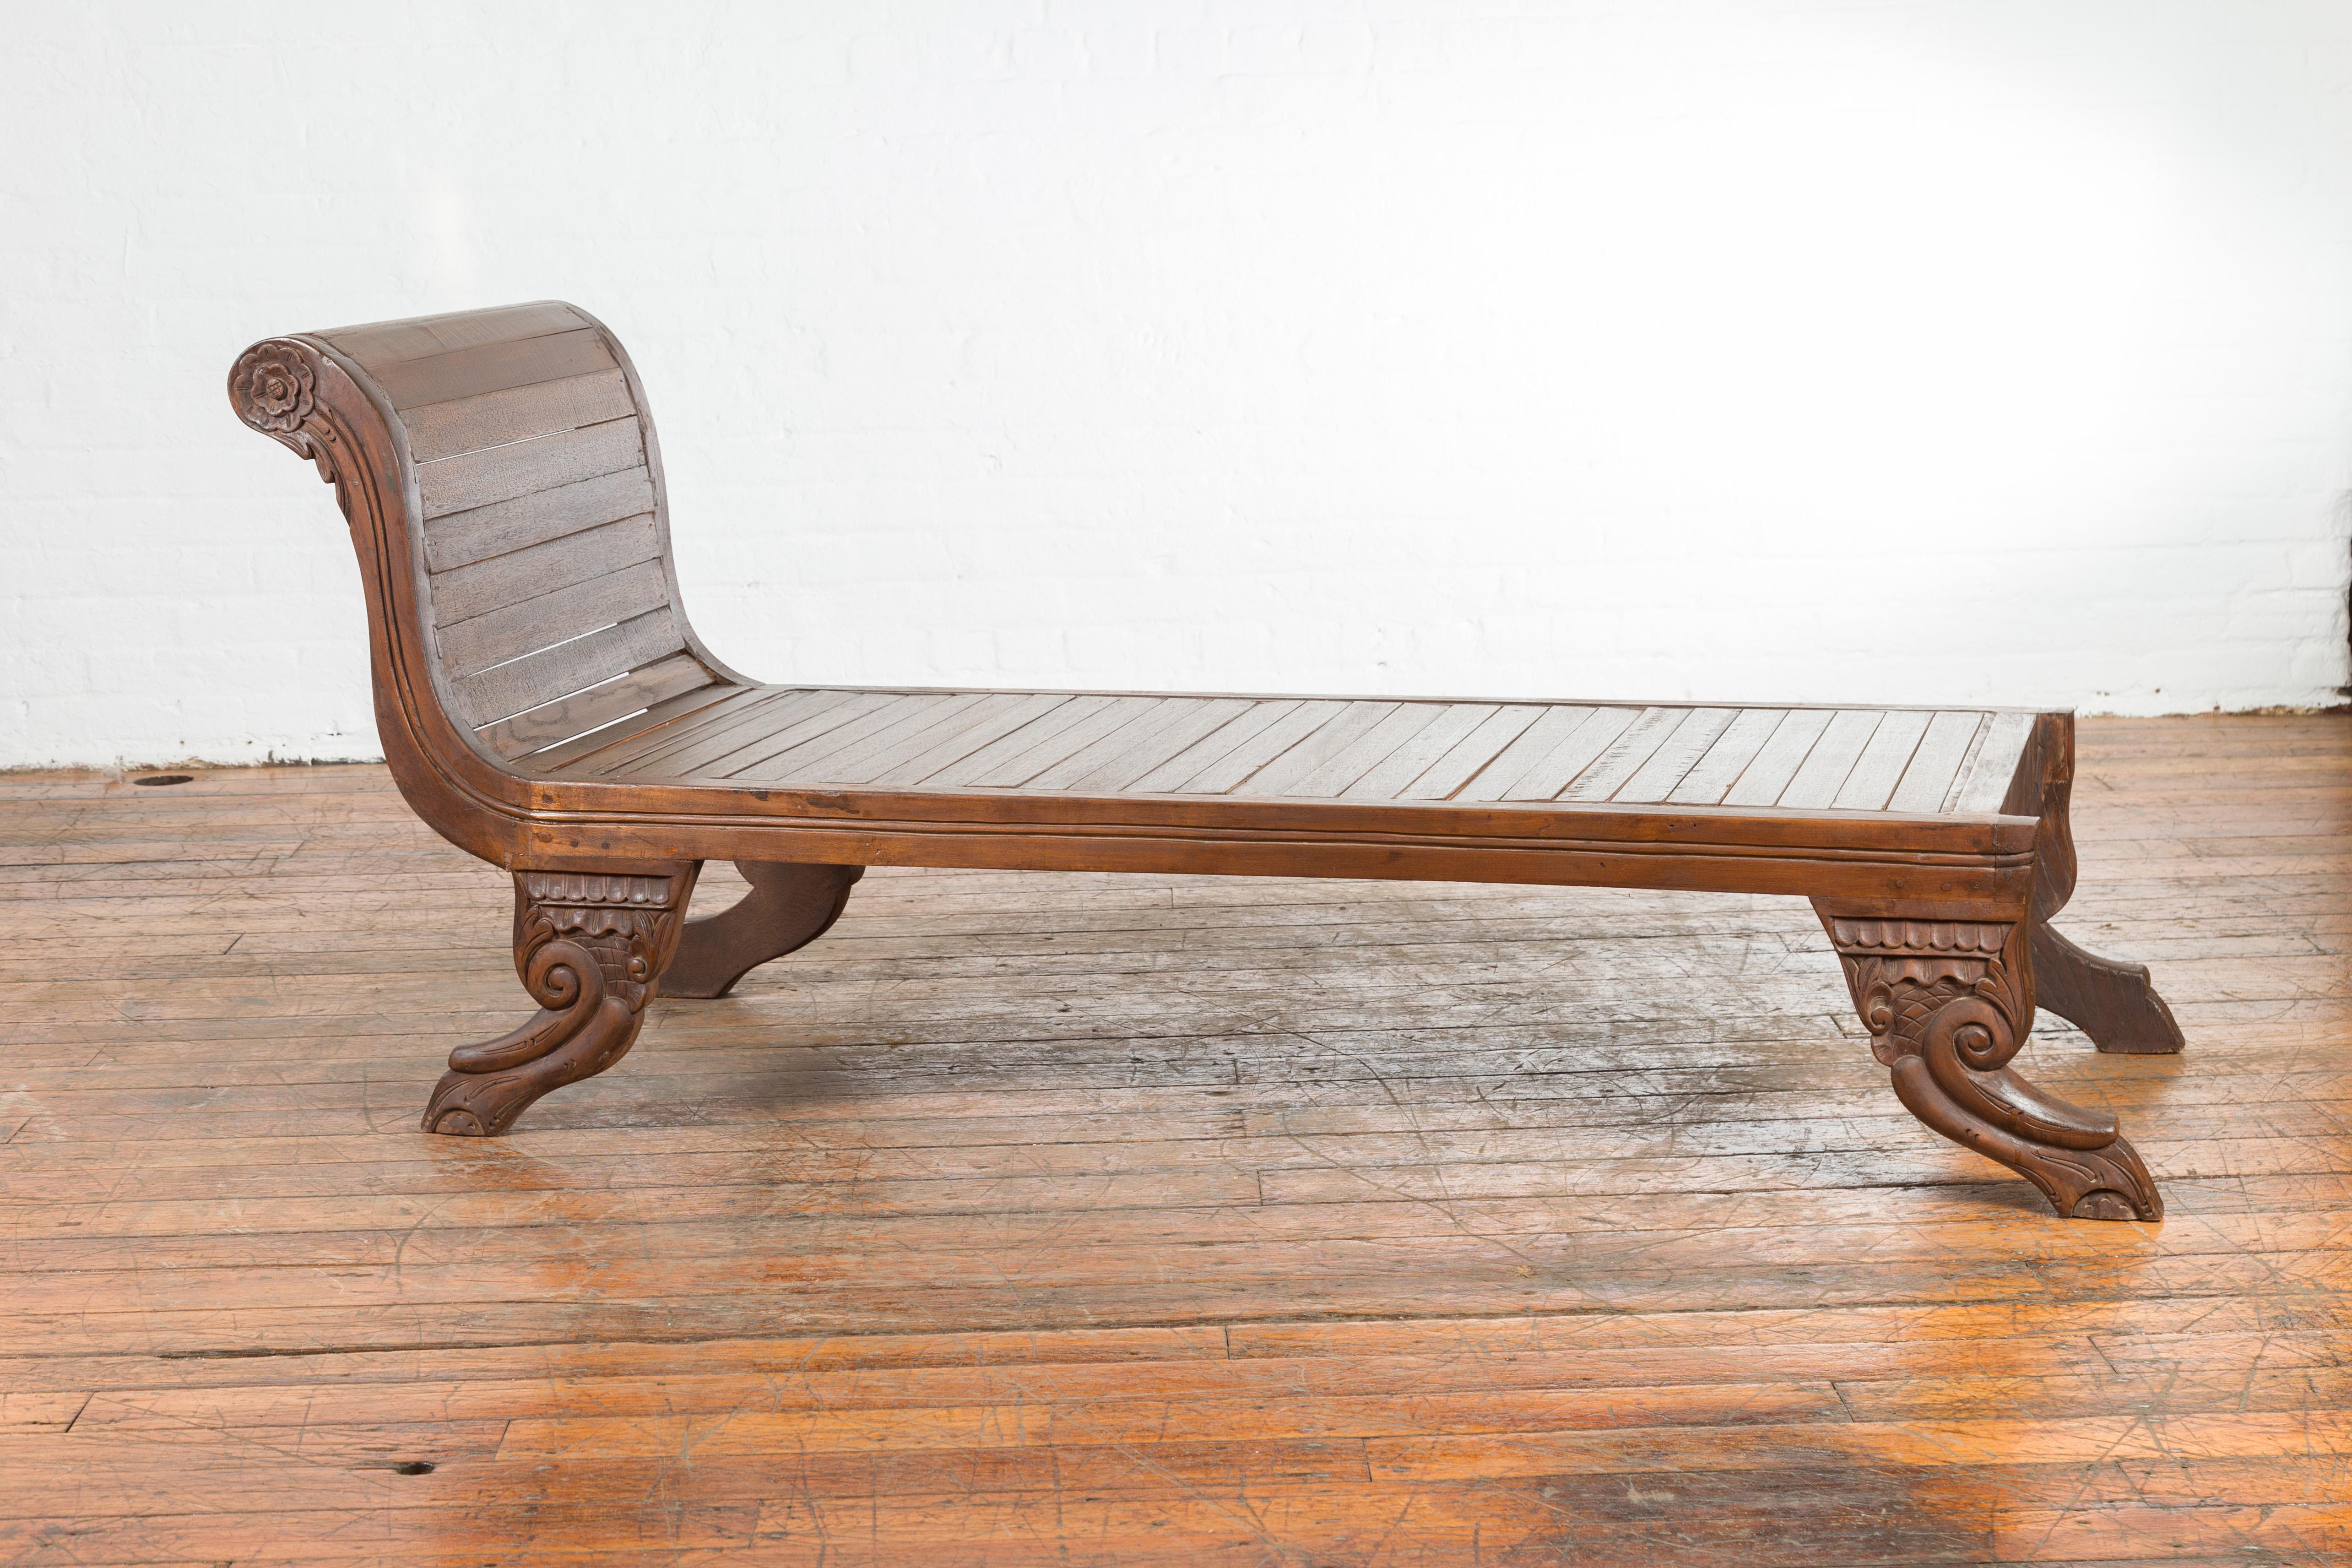 A Dutch Colonial period Indonesian lounge chair from the early 20th century with paw feet and slatted seat. Created in Indonesia during the early years of the 20th century, this wooden lounge chair features an out-scrolling back adorned with carved